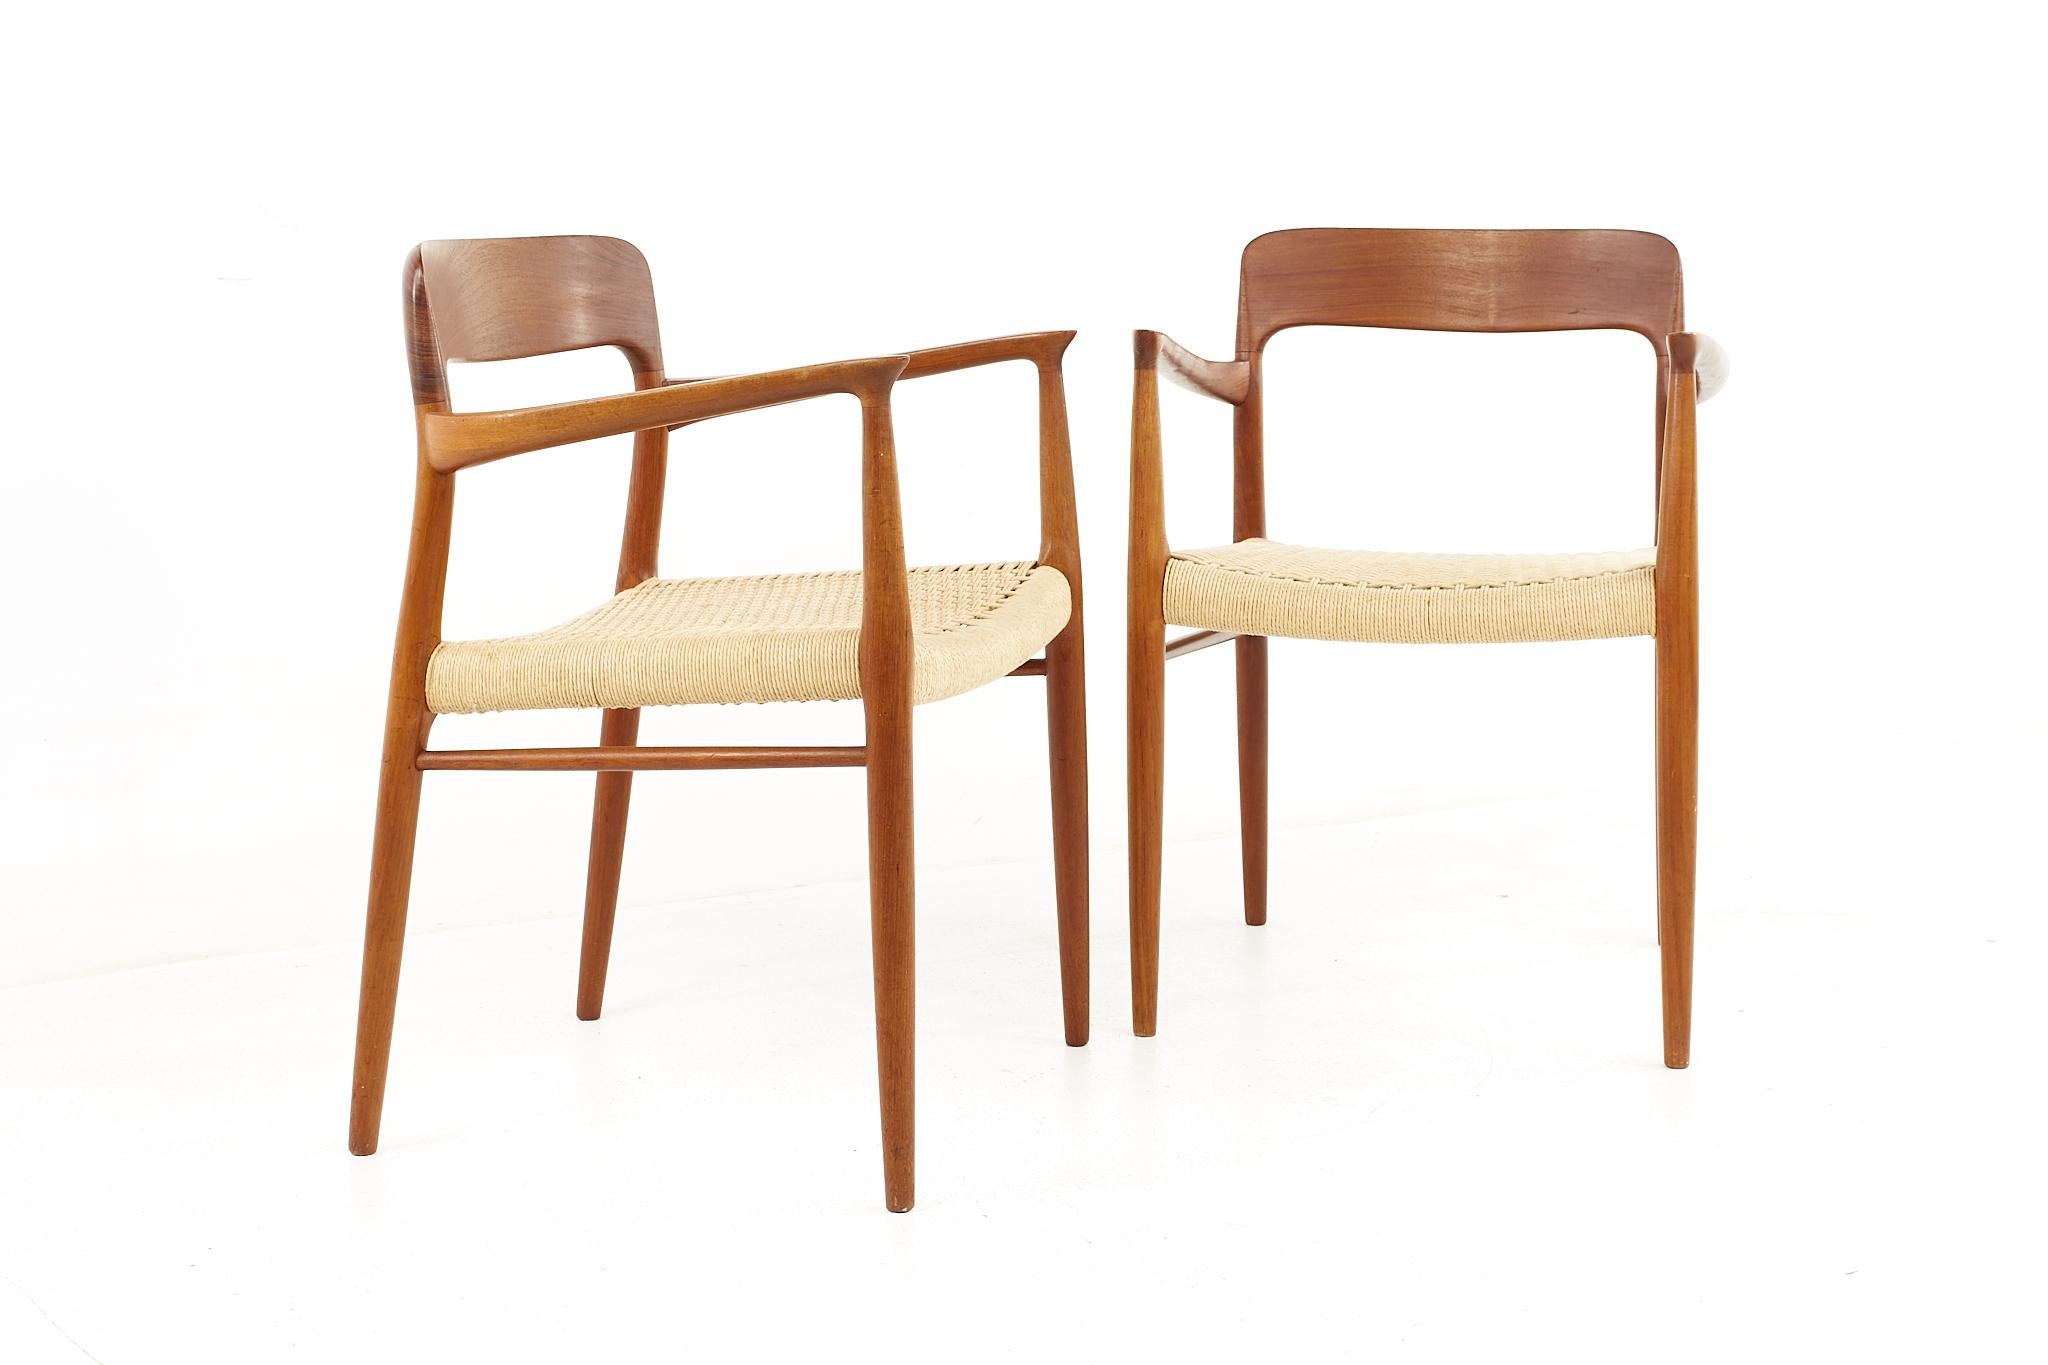 Niels Moller Model 77 mid century teak dining armchairs - a pair

Each chair measures: 22.5 wide x 19 deep x 30.5 high, with a seat height of 17 inches 

All pieces of furniture can be had in what we call restored vintage condition. That means